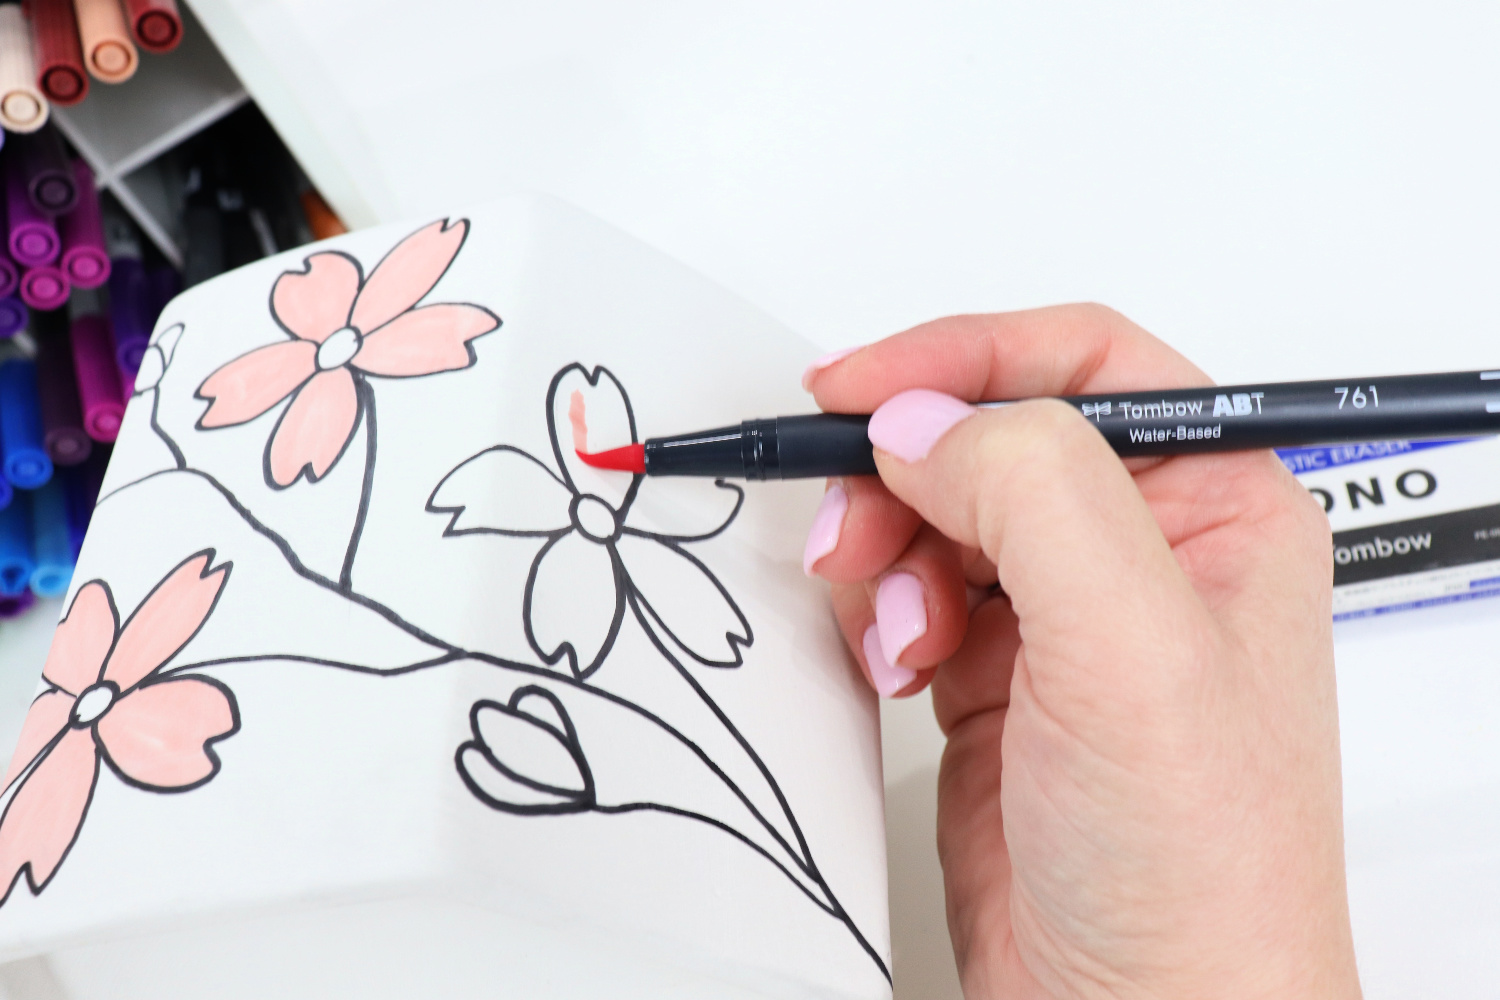 Image contains Amy’s hand using a pink Dual Brush Pen to color in the flowers on the planter.